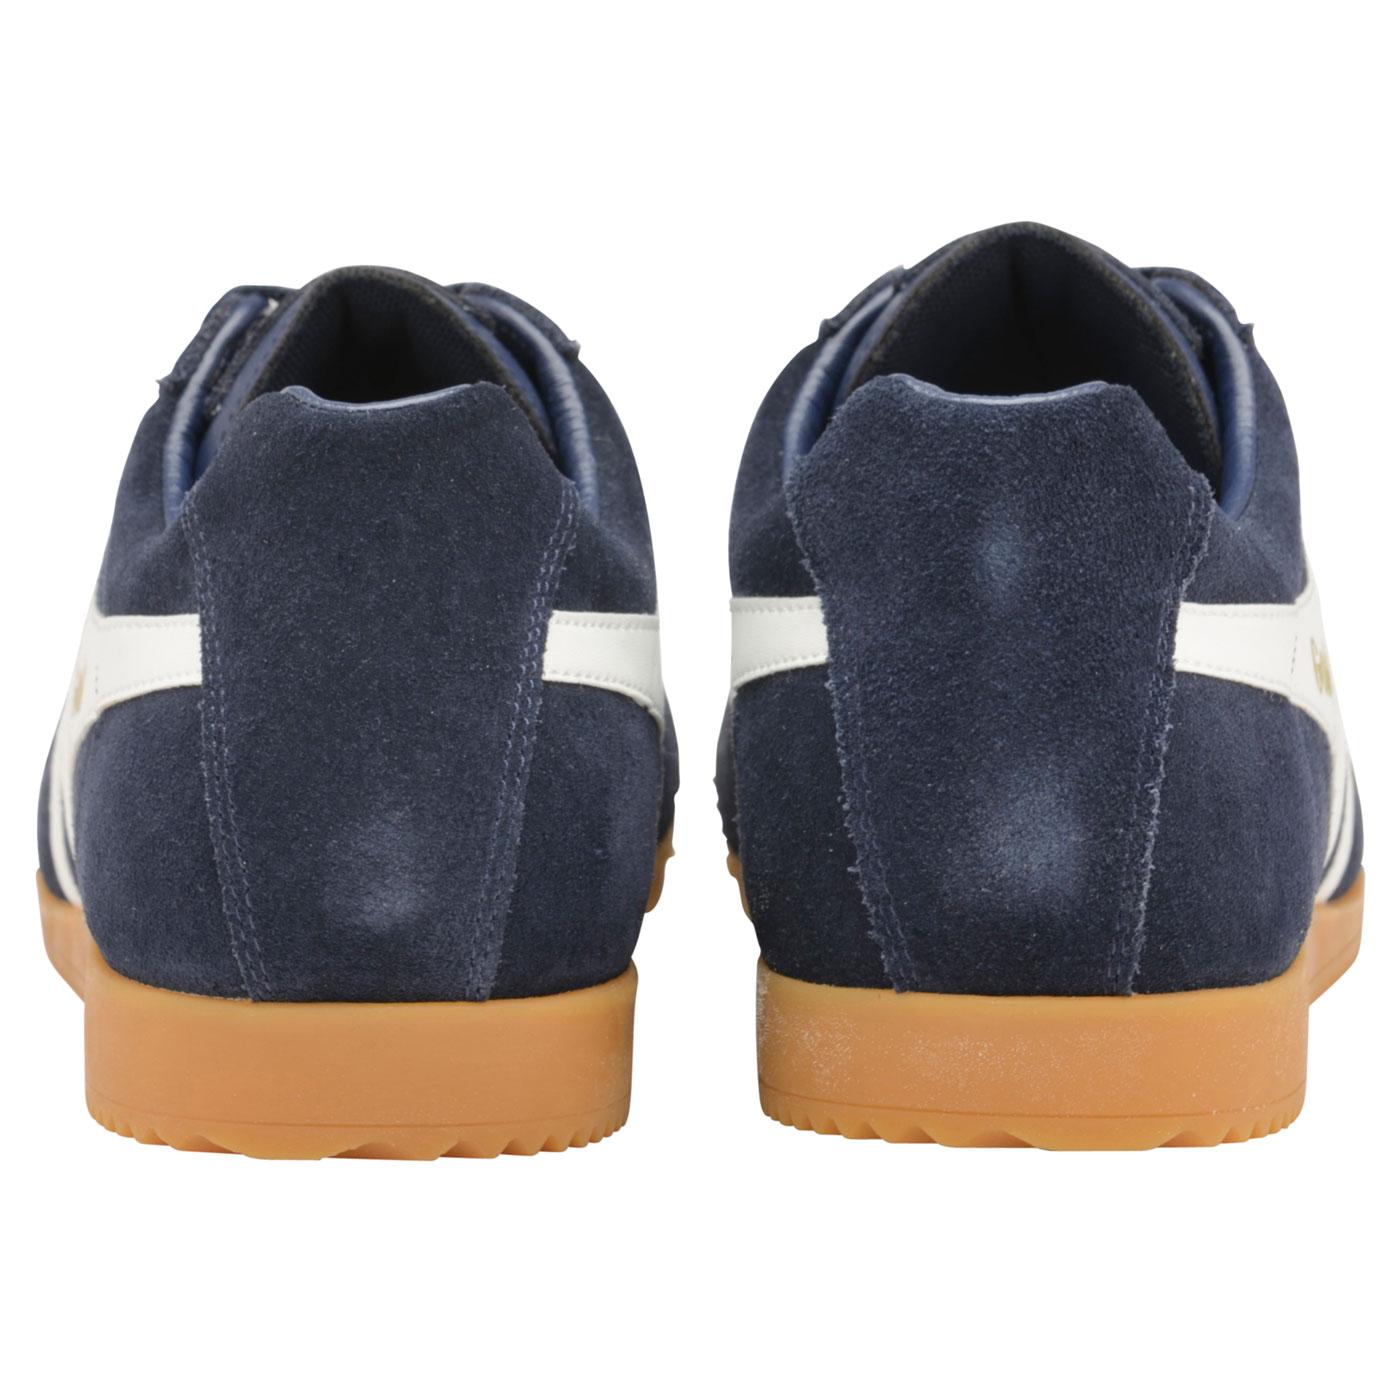 GOLA Harrier Suede Mens Retro Trainers in Navy/White